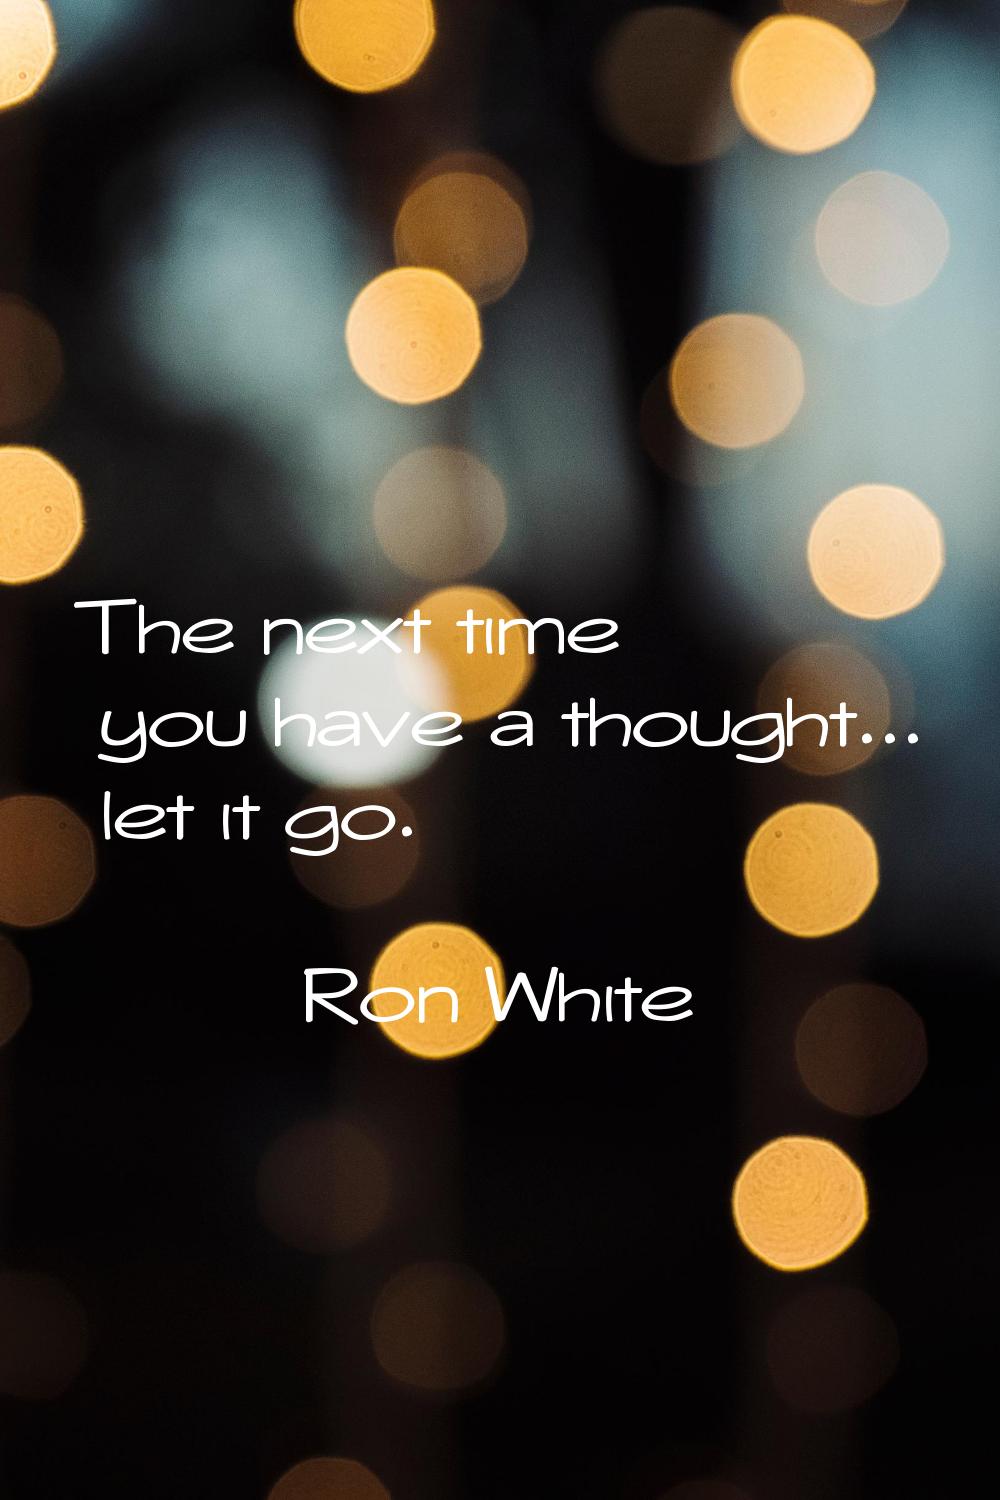 The next time you have a thought... let it go.